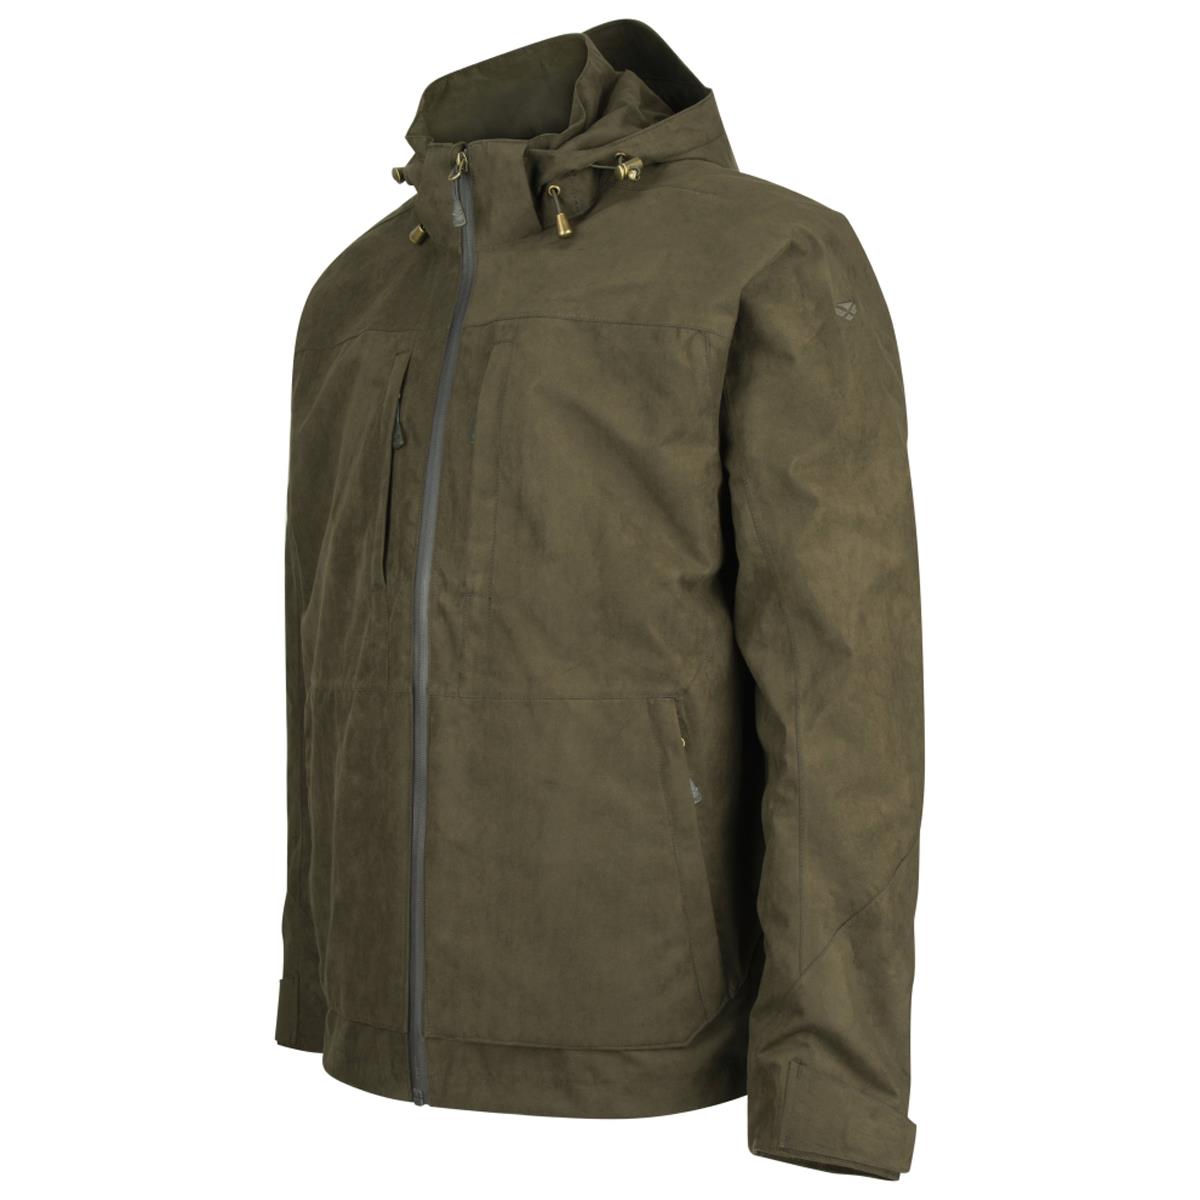 Hoggs Of Fife Rannoch Lightweight Waterproof Shooting Jacket Questions & Answers